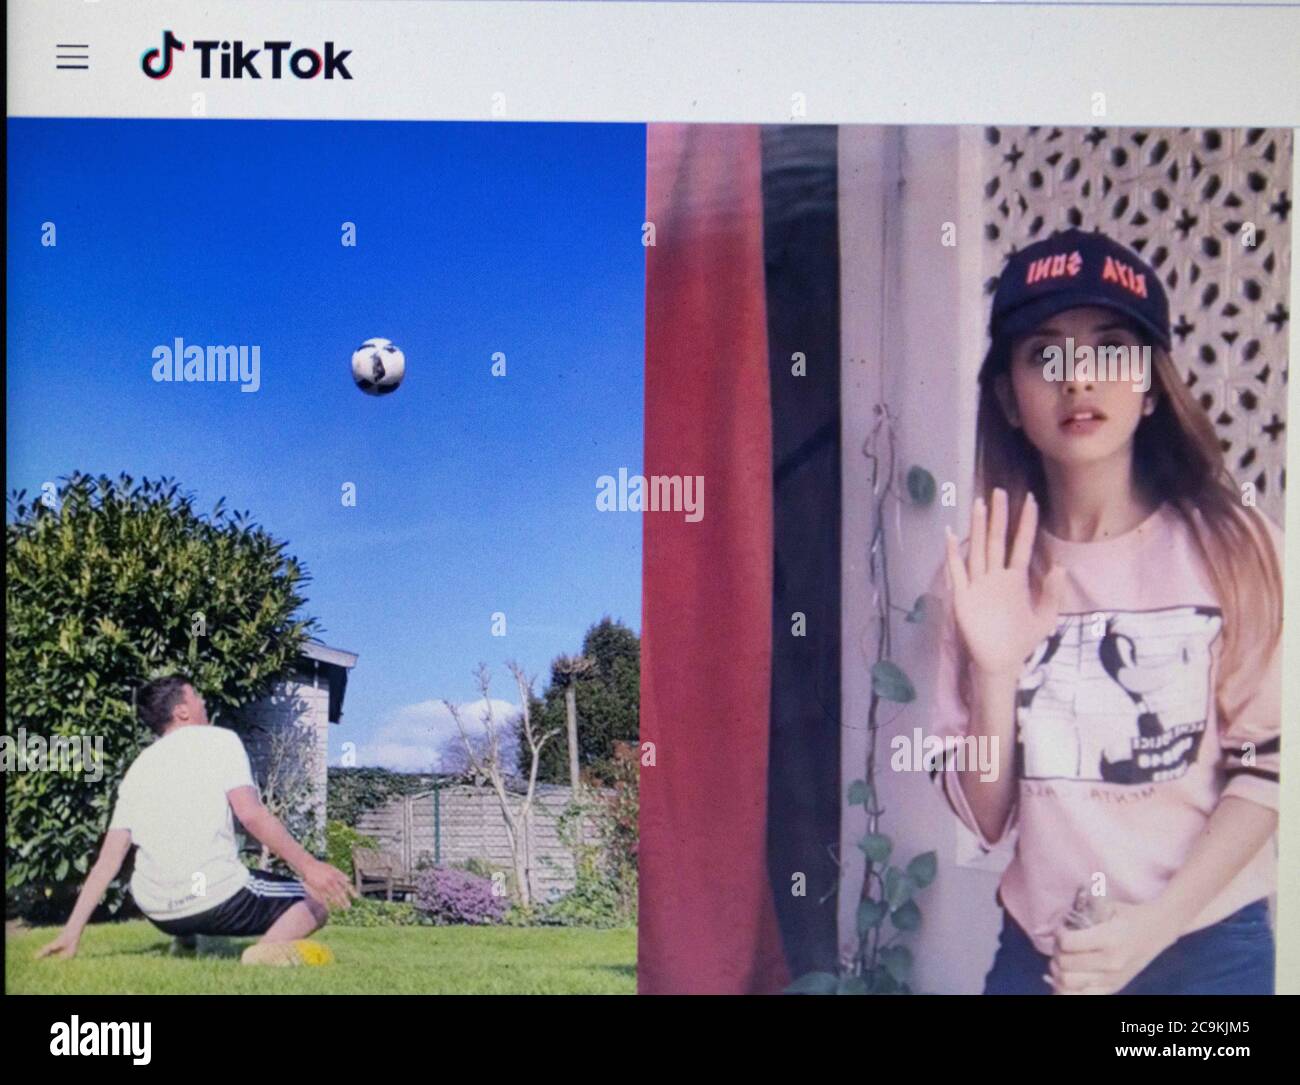 July 31, 2020: A boy playing soccer and a sad girl waving goodbye is shown on the TikTok social media app website in San Diego, California on Friday, July 31st, 2020. United States President Donald Trump is considering banning the Chinese TikTok through an executive order that could be issued as soon as Saturday, August 1st, 2020. Credit: Rishi Deka/ZUMA Wire/Alamy Live News Stock Photo